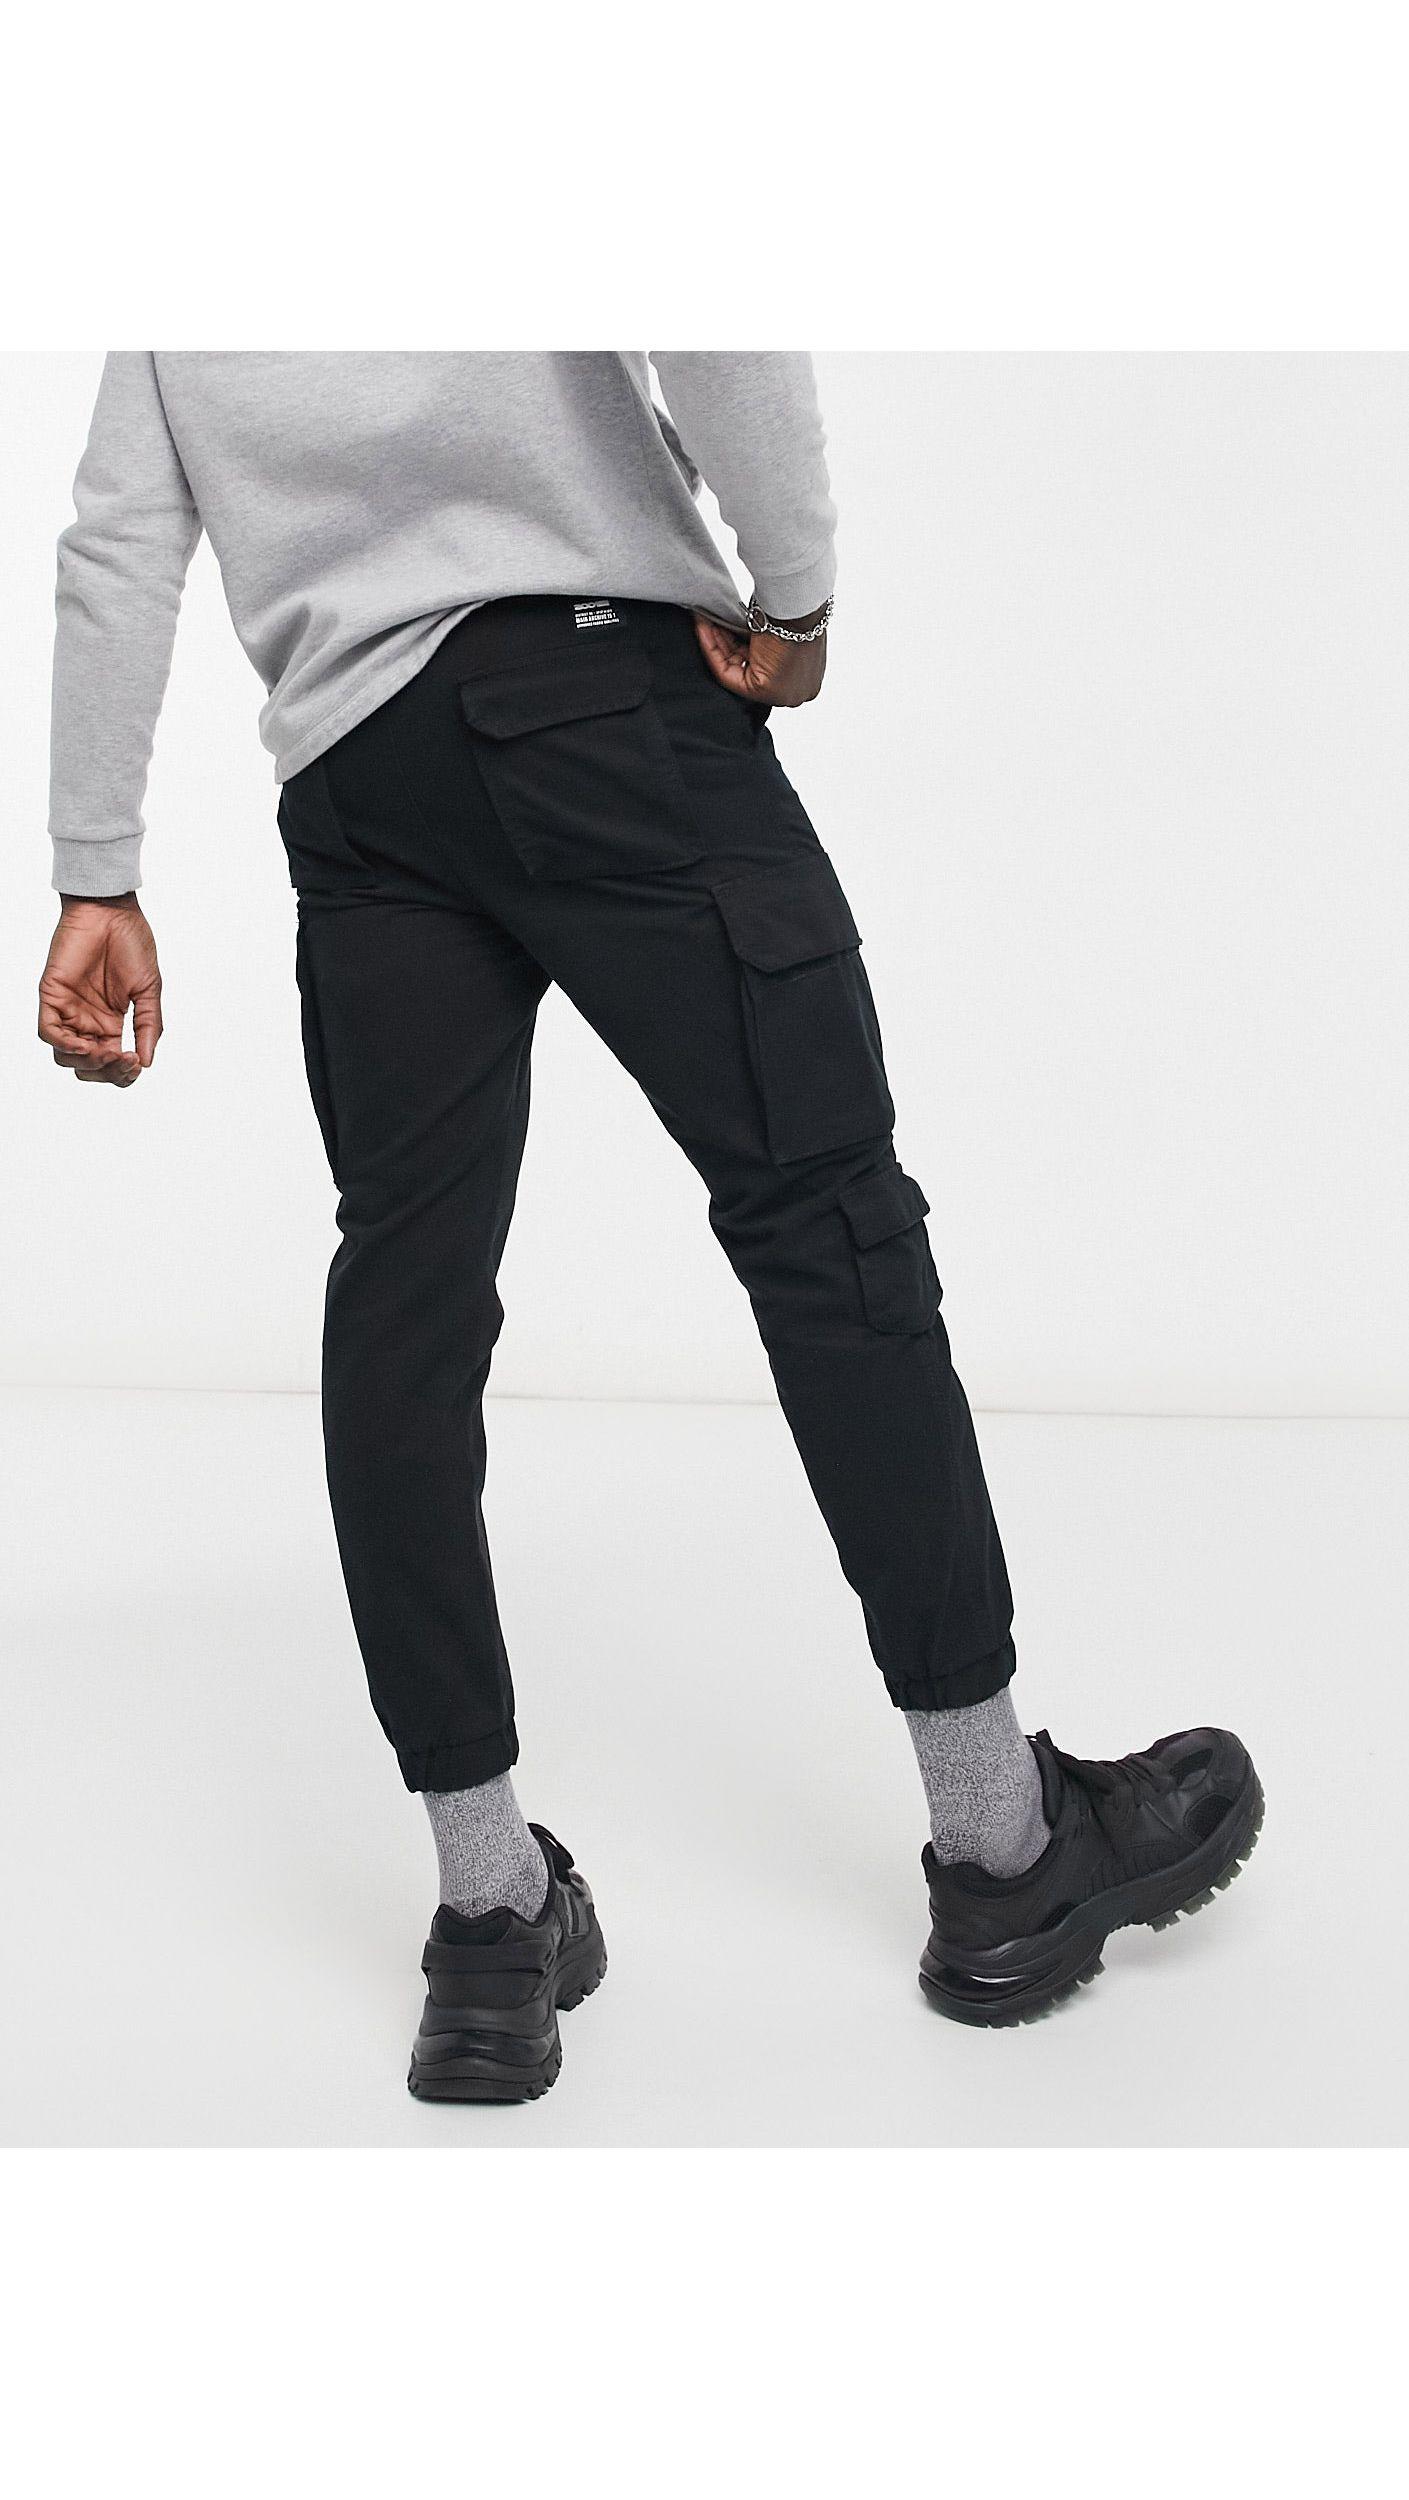 Bershka Cargo Trousers With Key Chain in Black for Men - Lyst